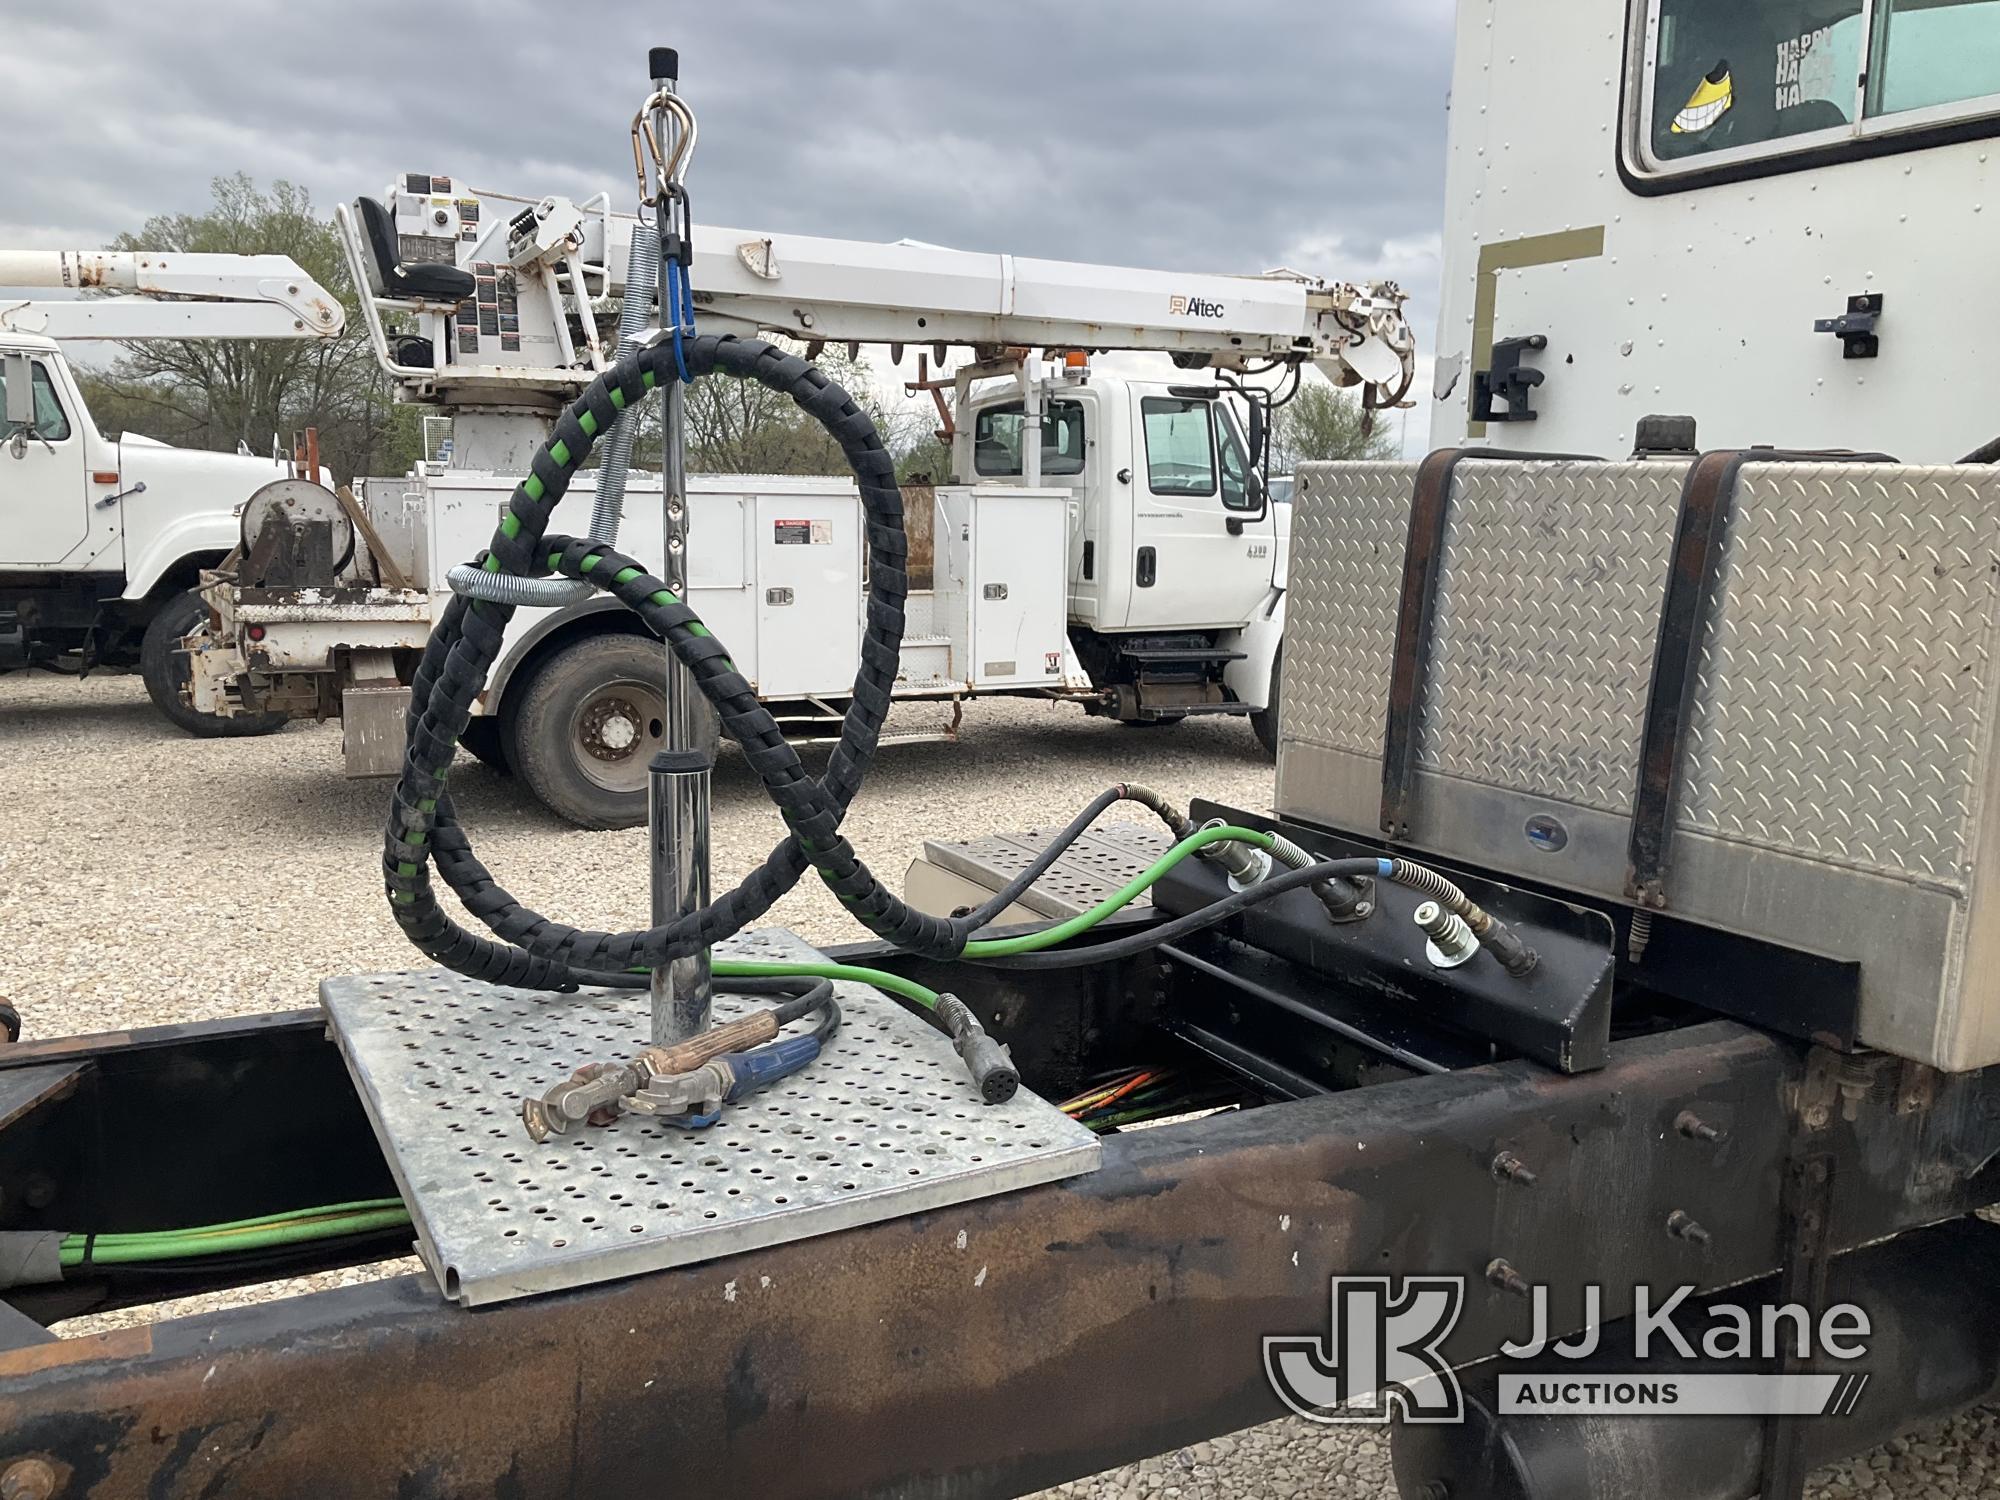 (Tipton, MO) 2007 International 5900i T/A Truck Tractor Runs and Moves) (Check Engine Light On